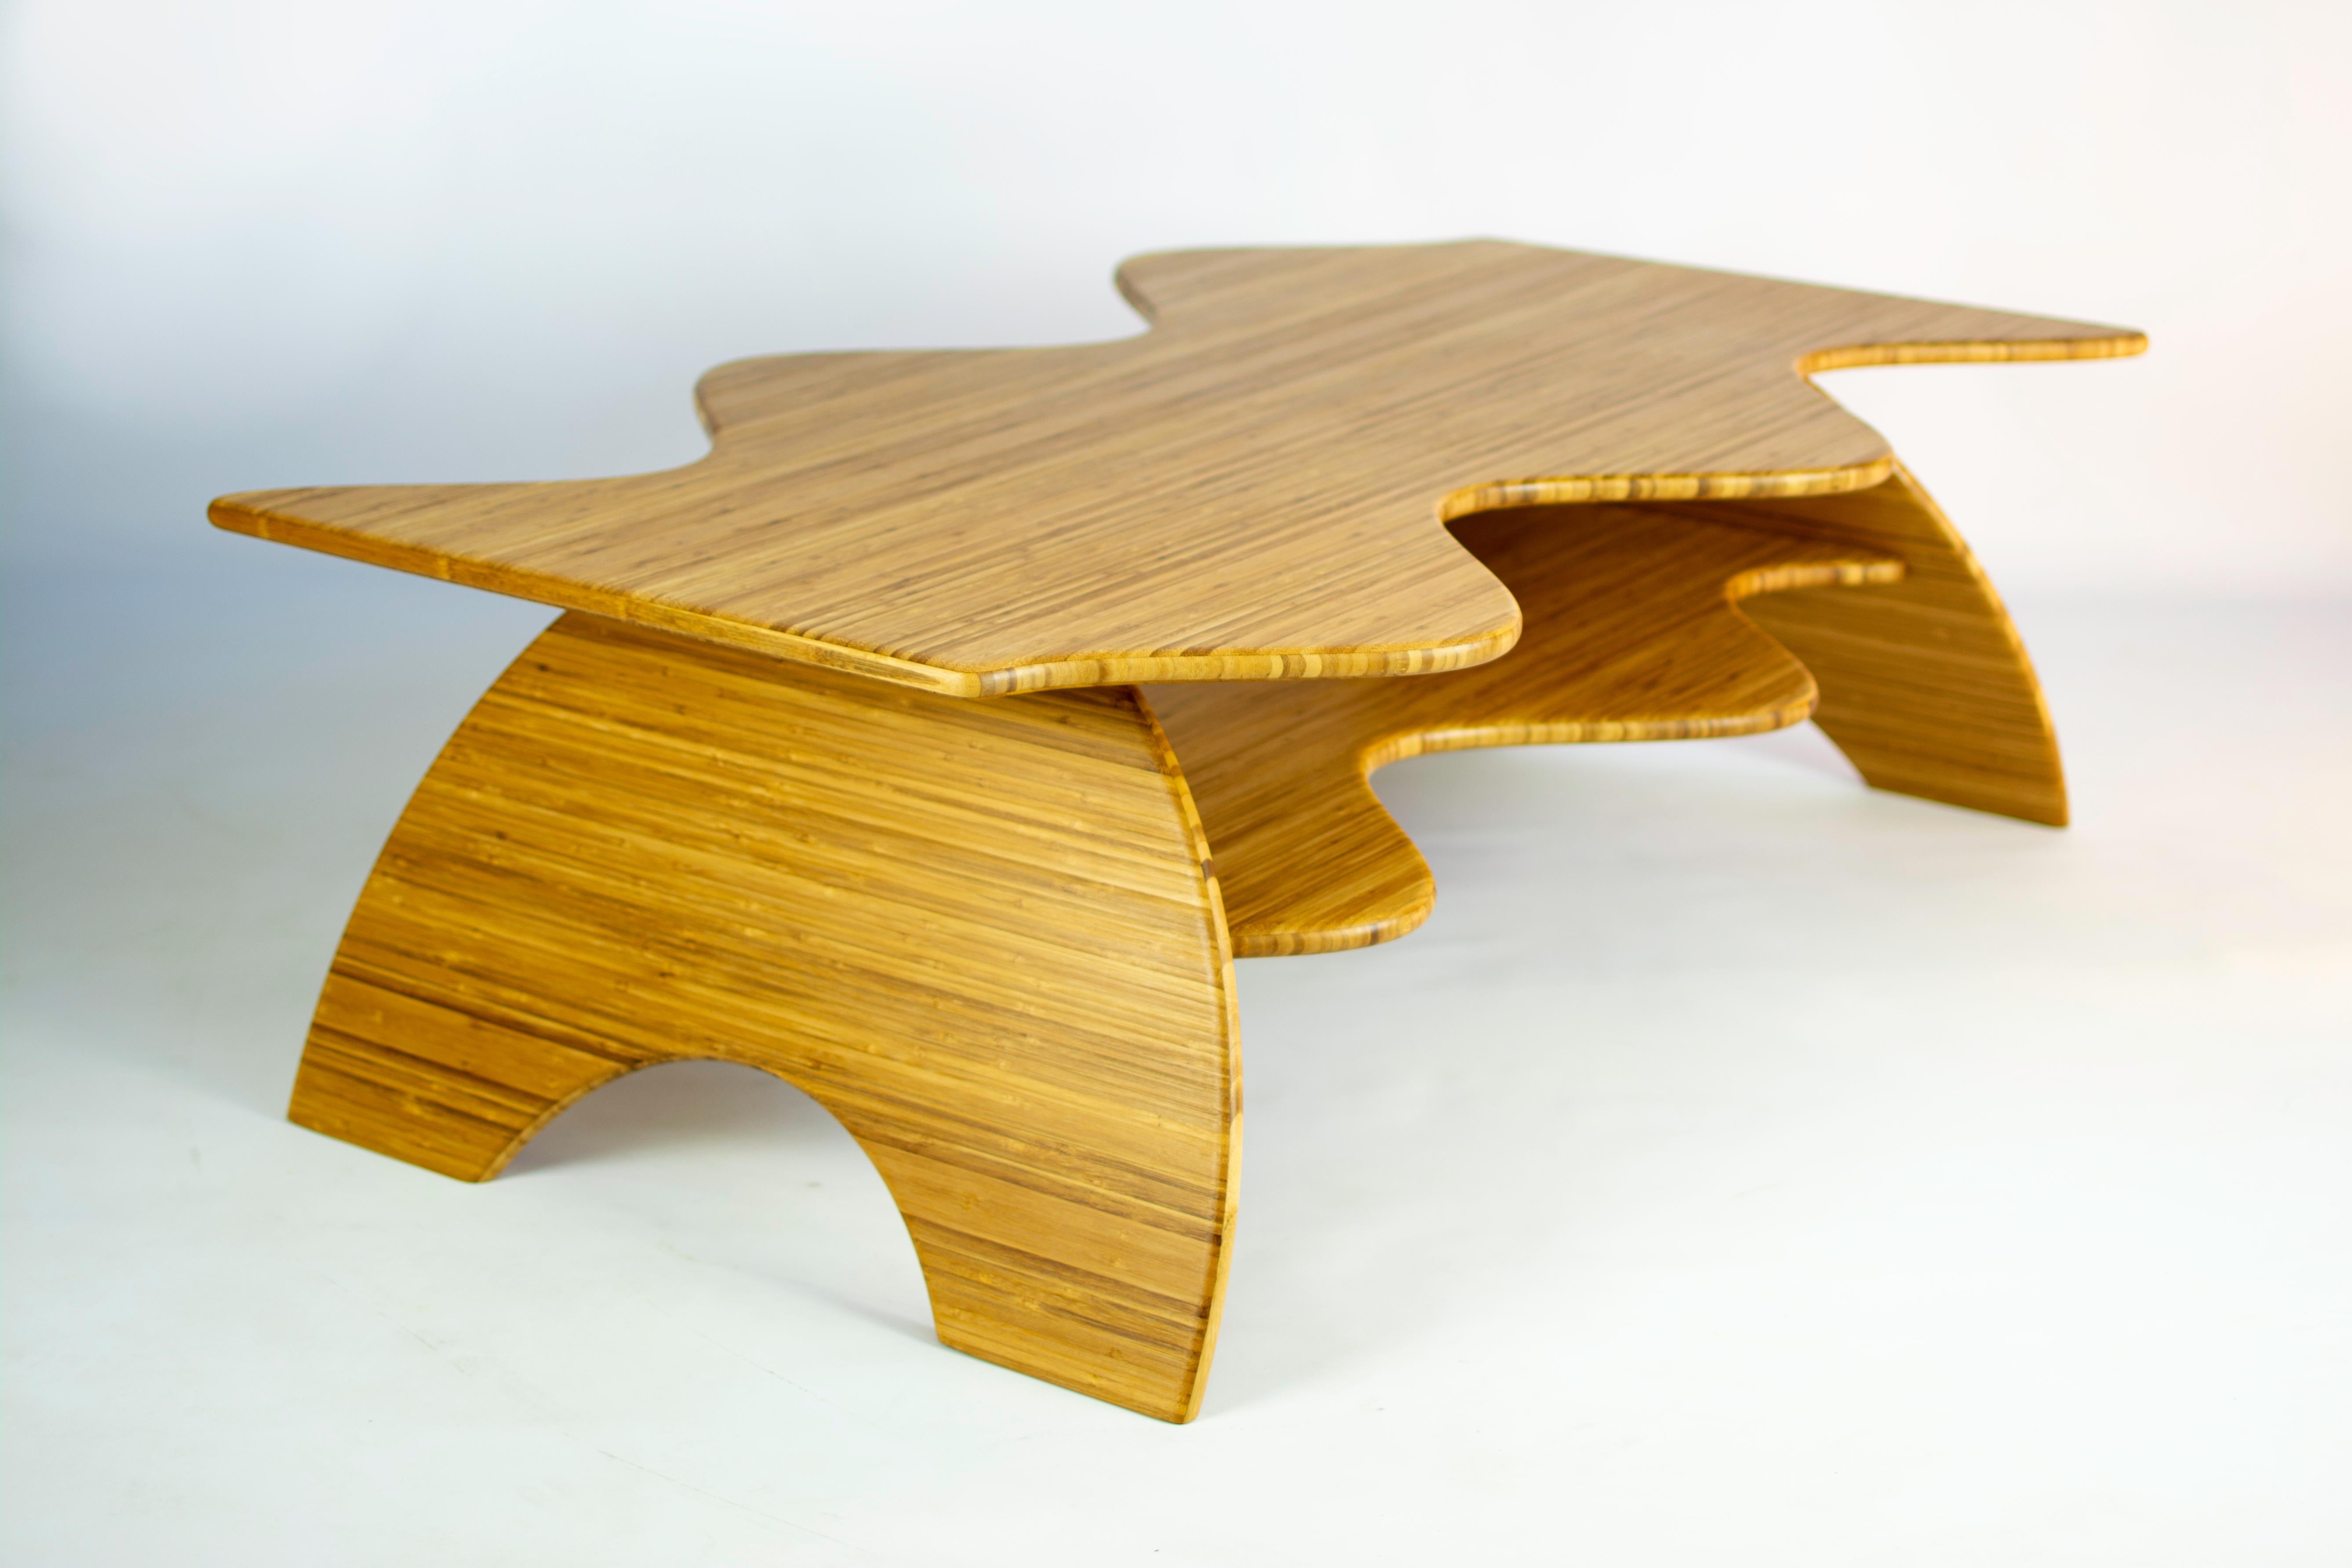 The Wiggle coffee table is hand made entirely from bamboo in our workshop located in Brooklyn, NY. The playful form of this table was inspired originally by the shape of a wavy hair comb. The rolling curves bring out the unique qualities of the